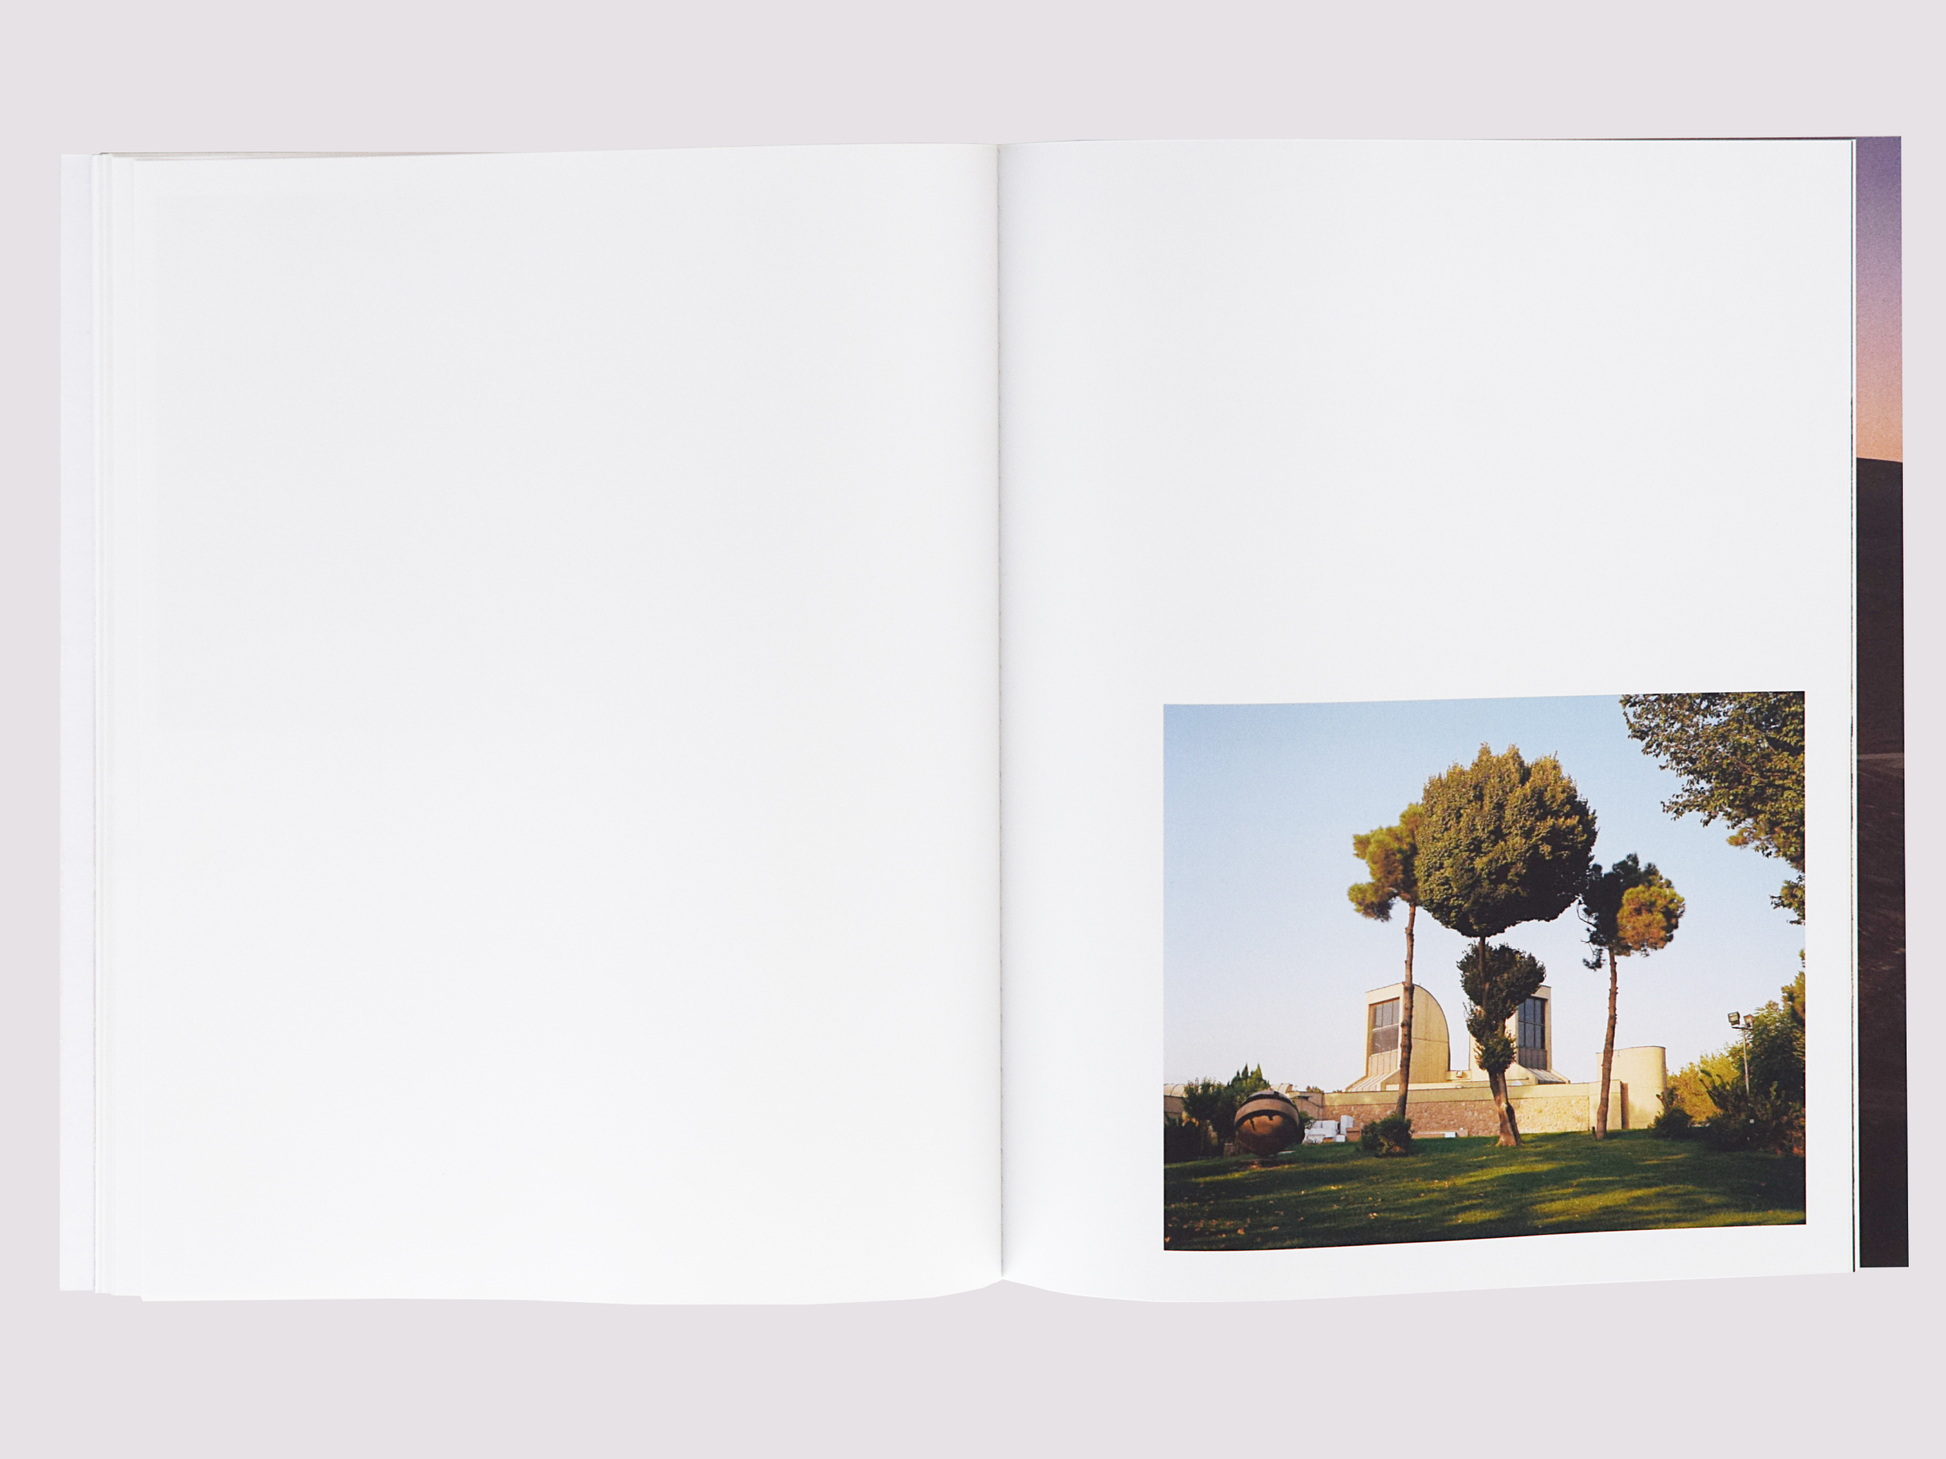 Tabriz to Shiraz/Sarah Pannel published by Perimeter Editions